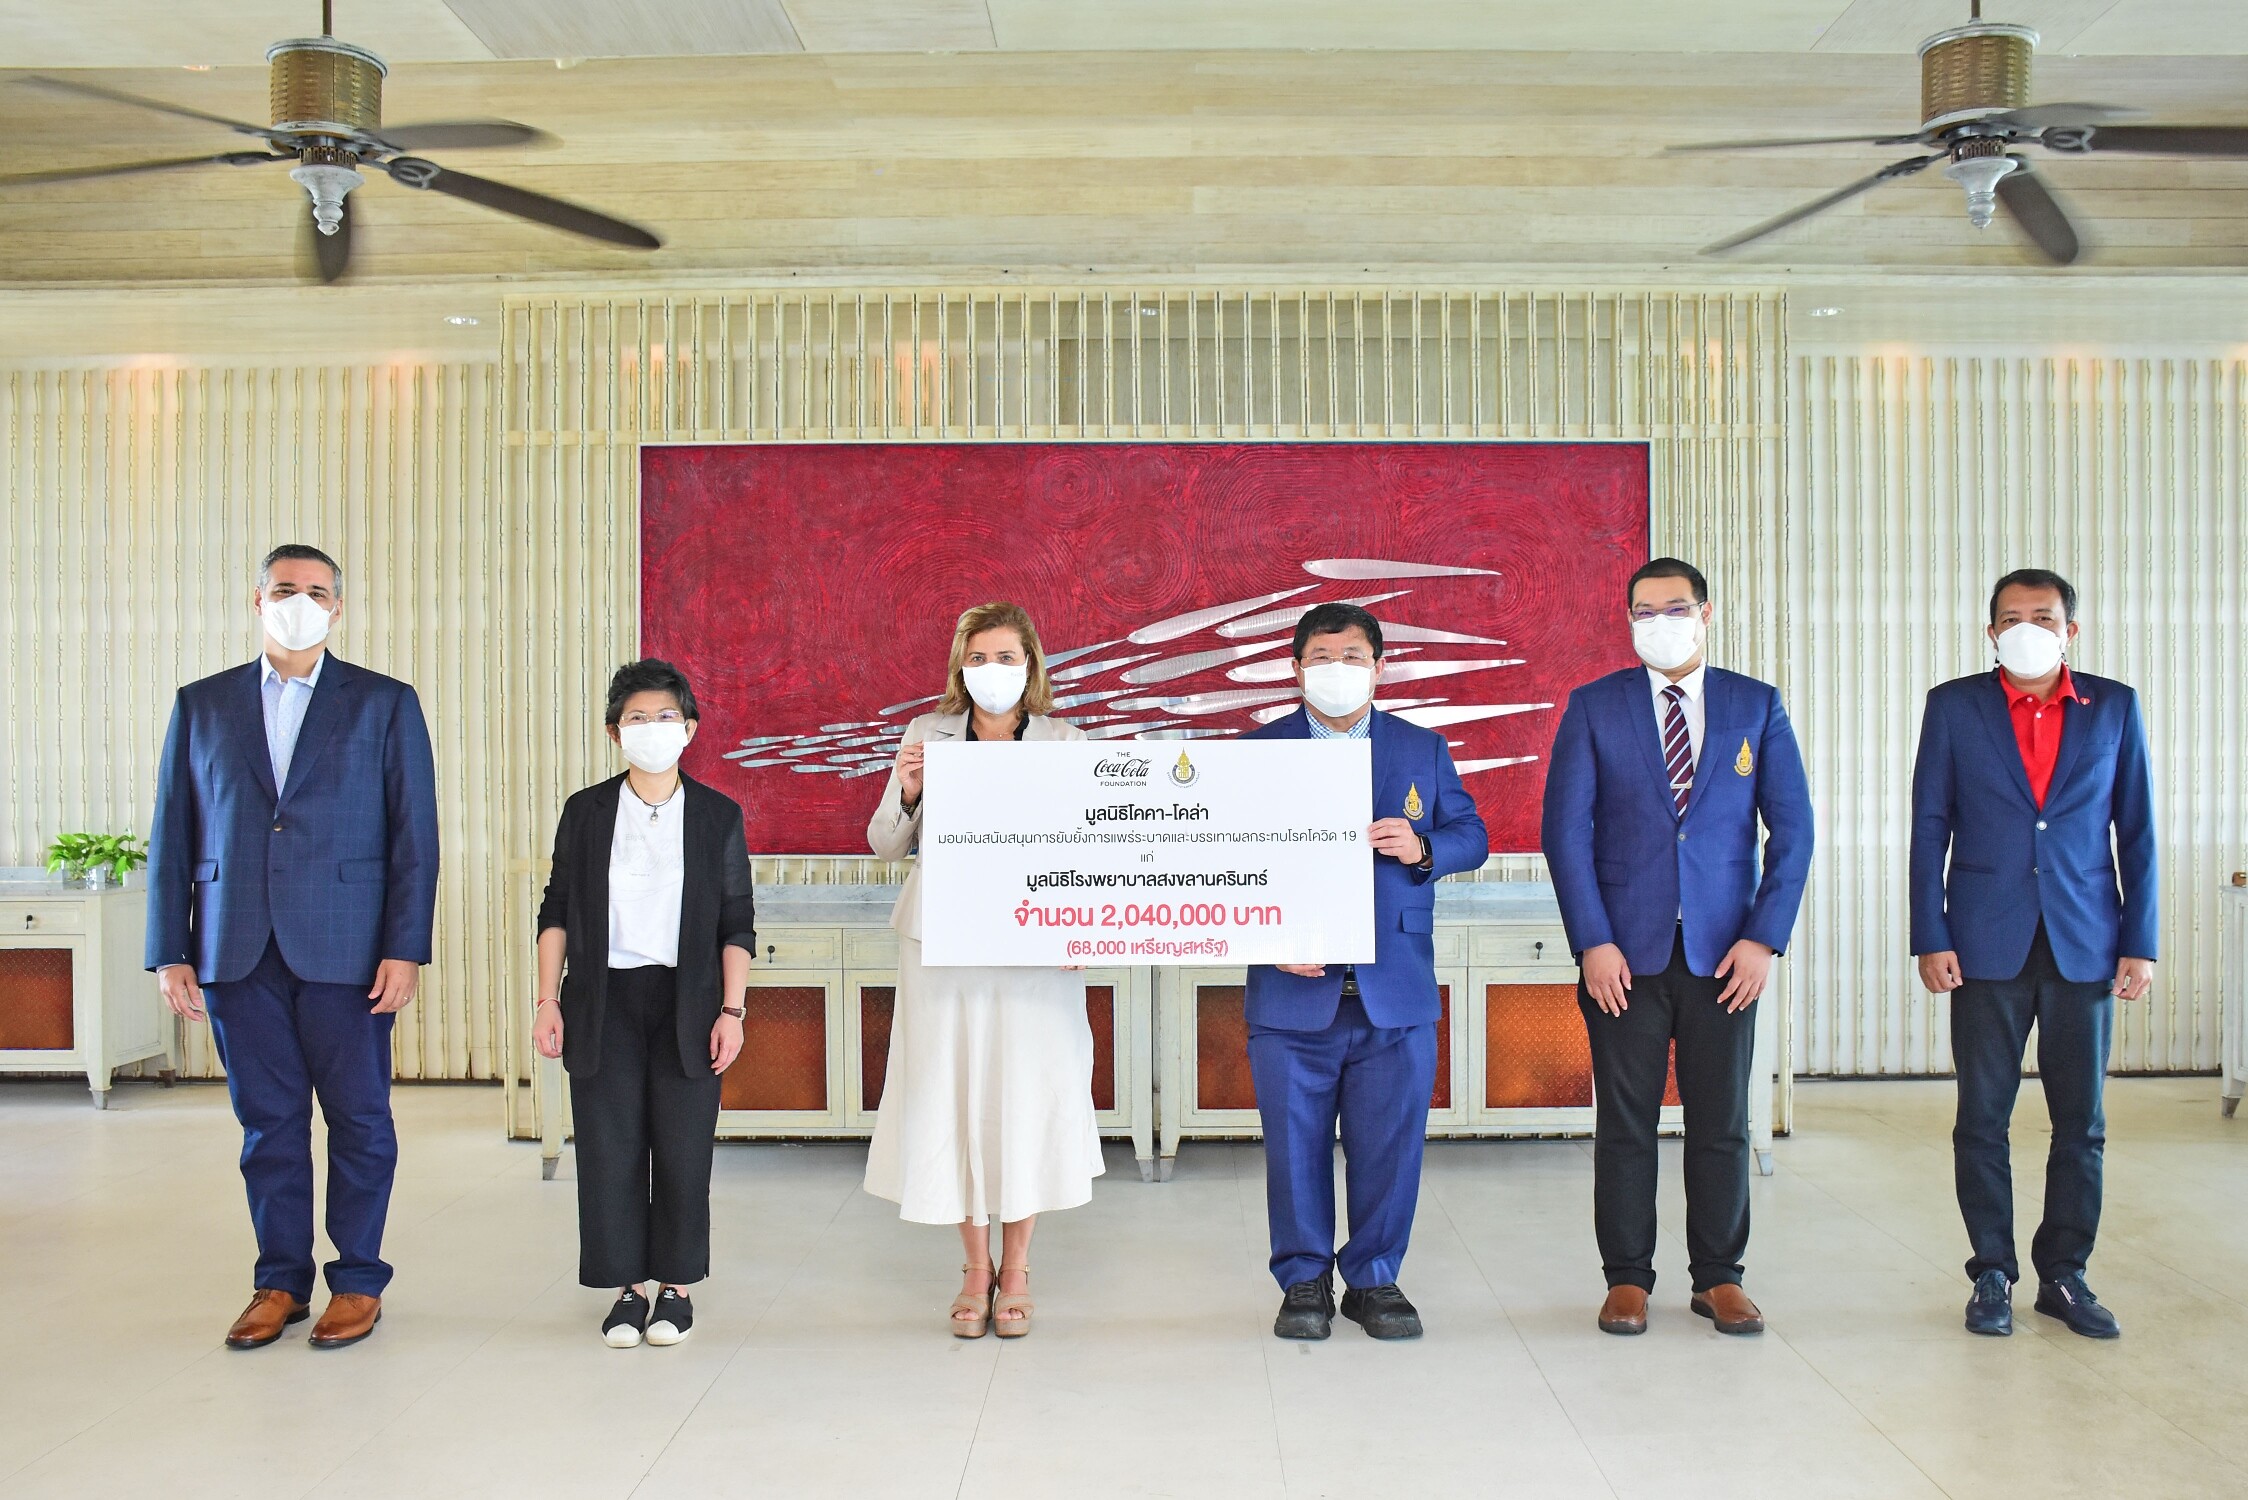 The Coca-Cola Foundation donates more than 2 million baht to Songklanagarind Hospital Foundation to help prevent spread of COVID-19